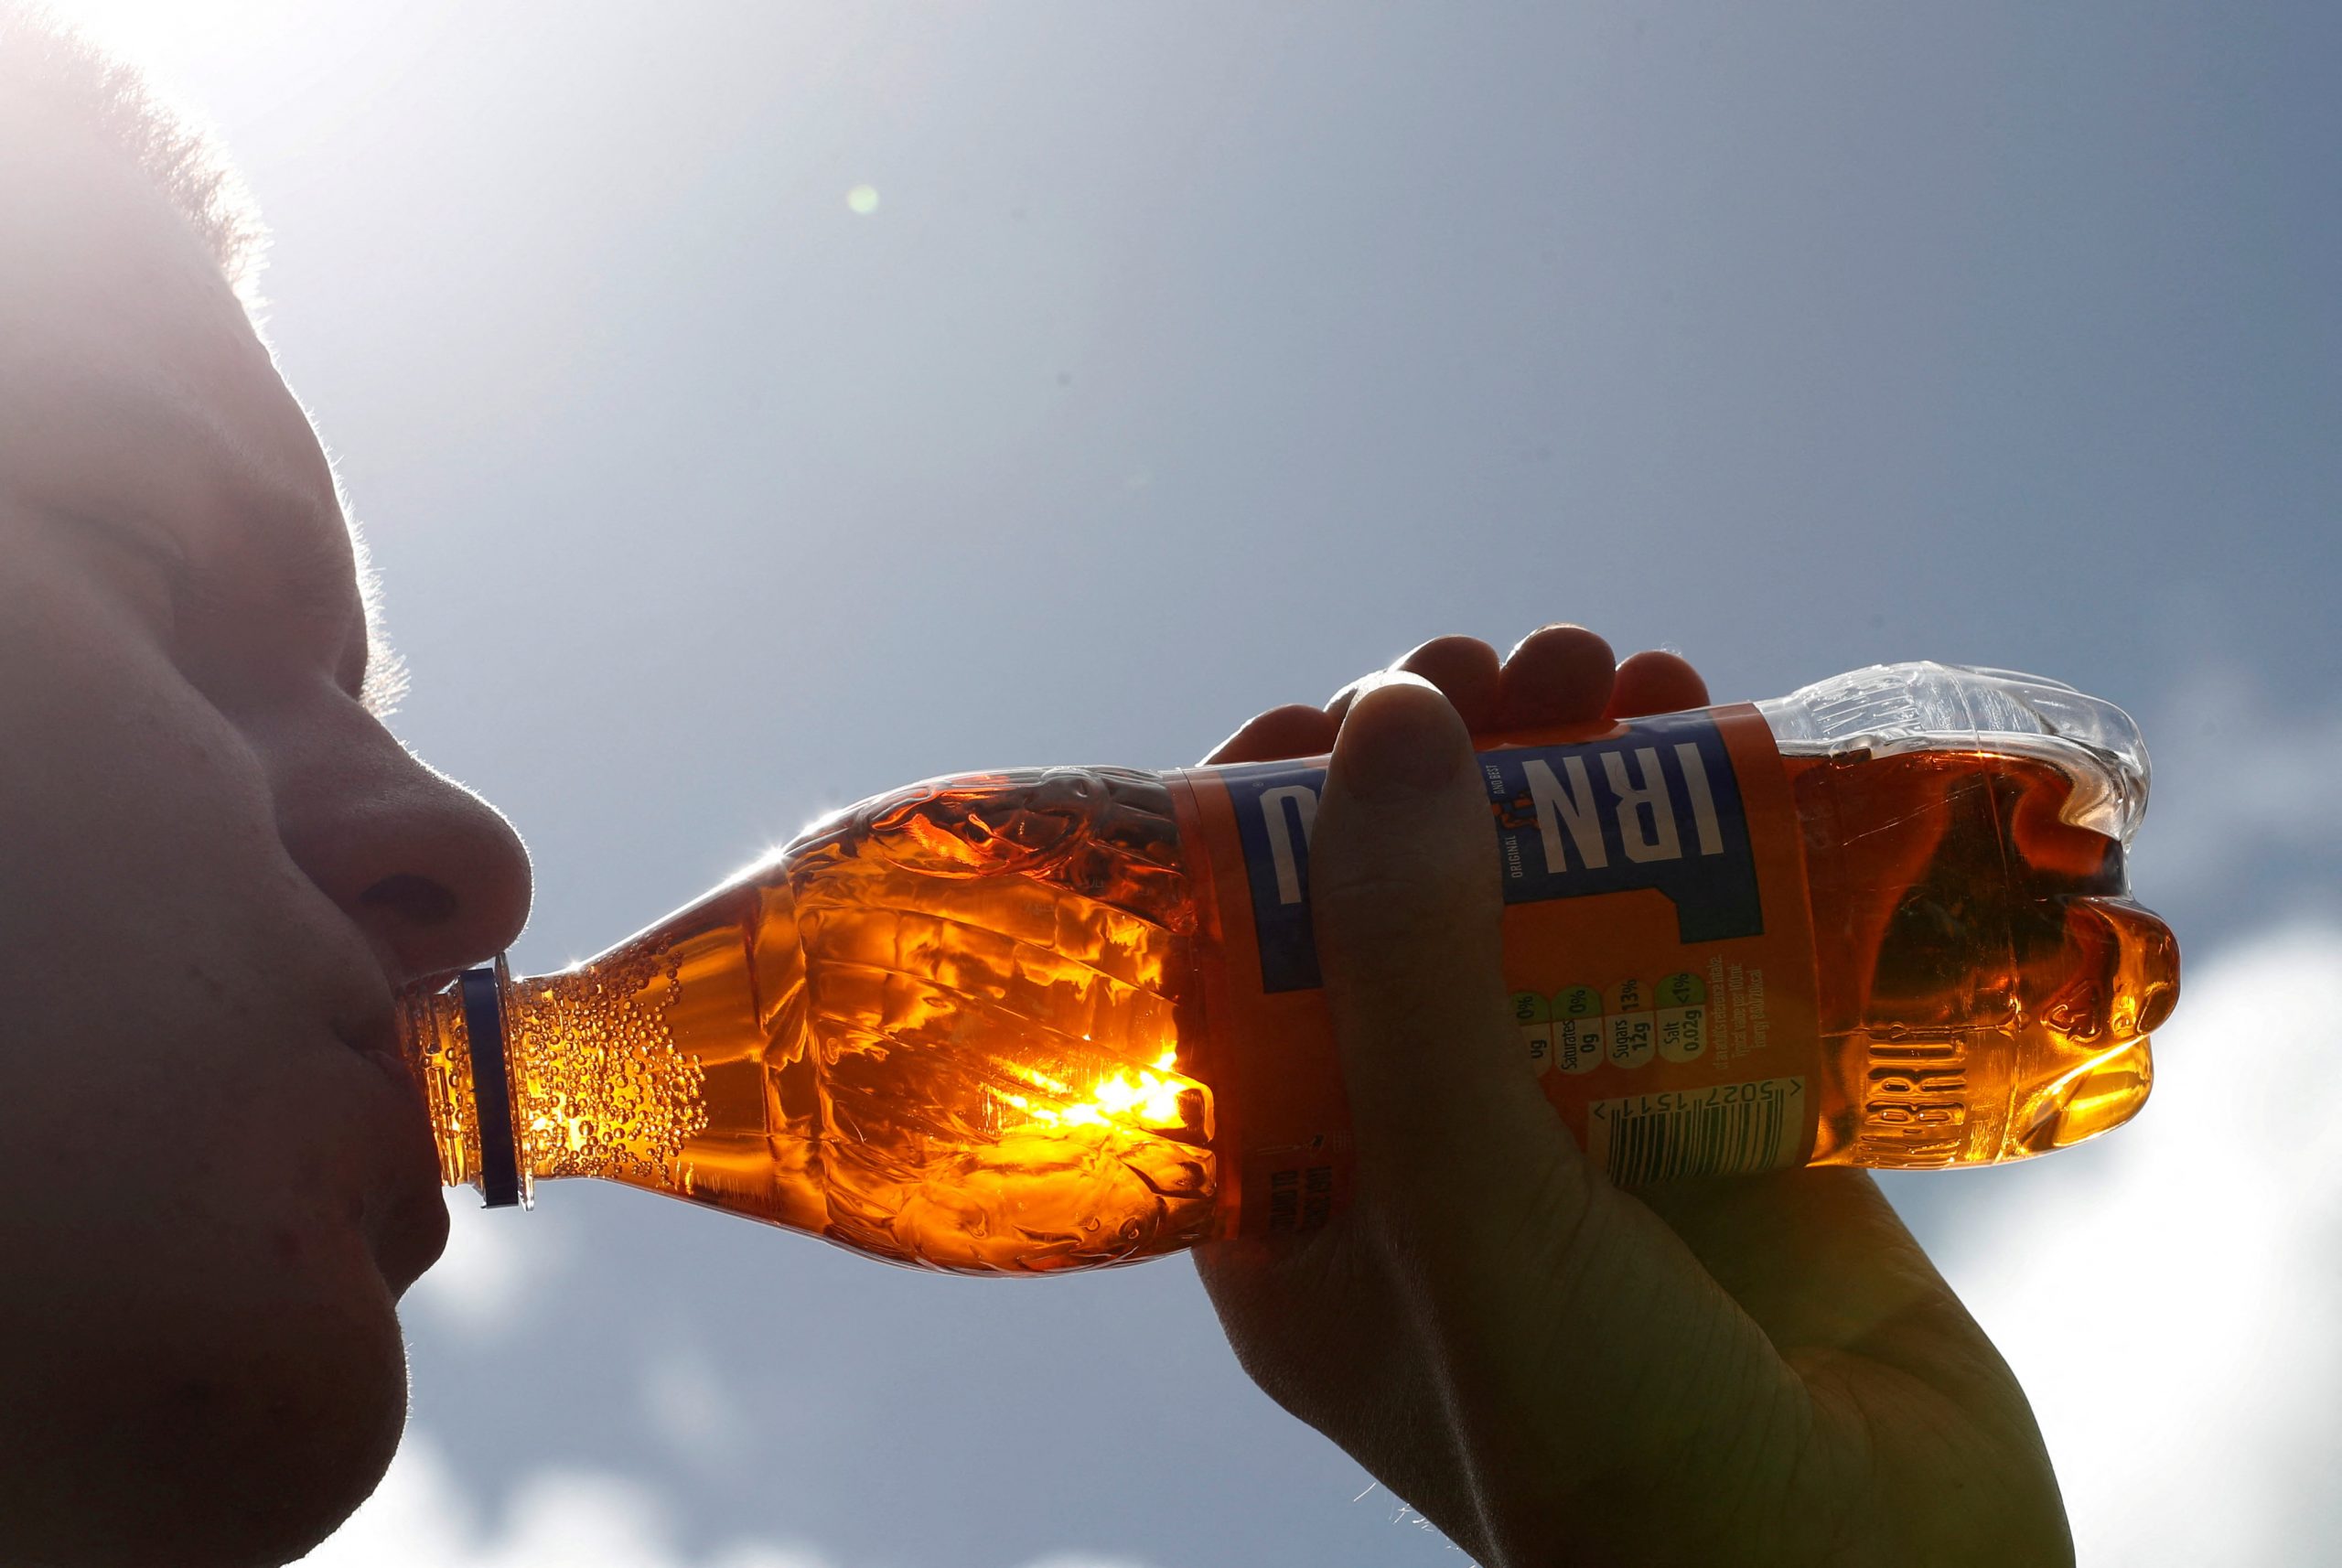 Irn-bru maker fears second-half margins to be hit by inflation